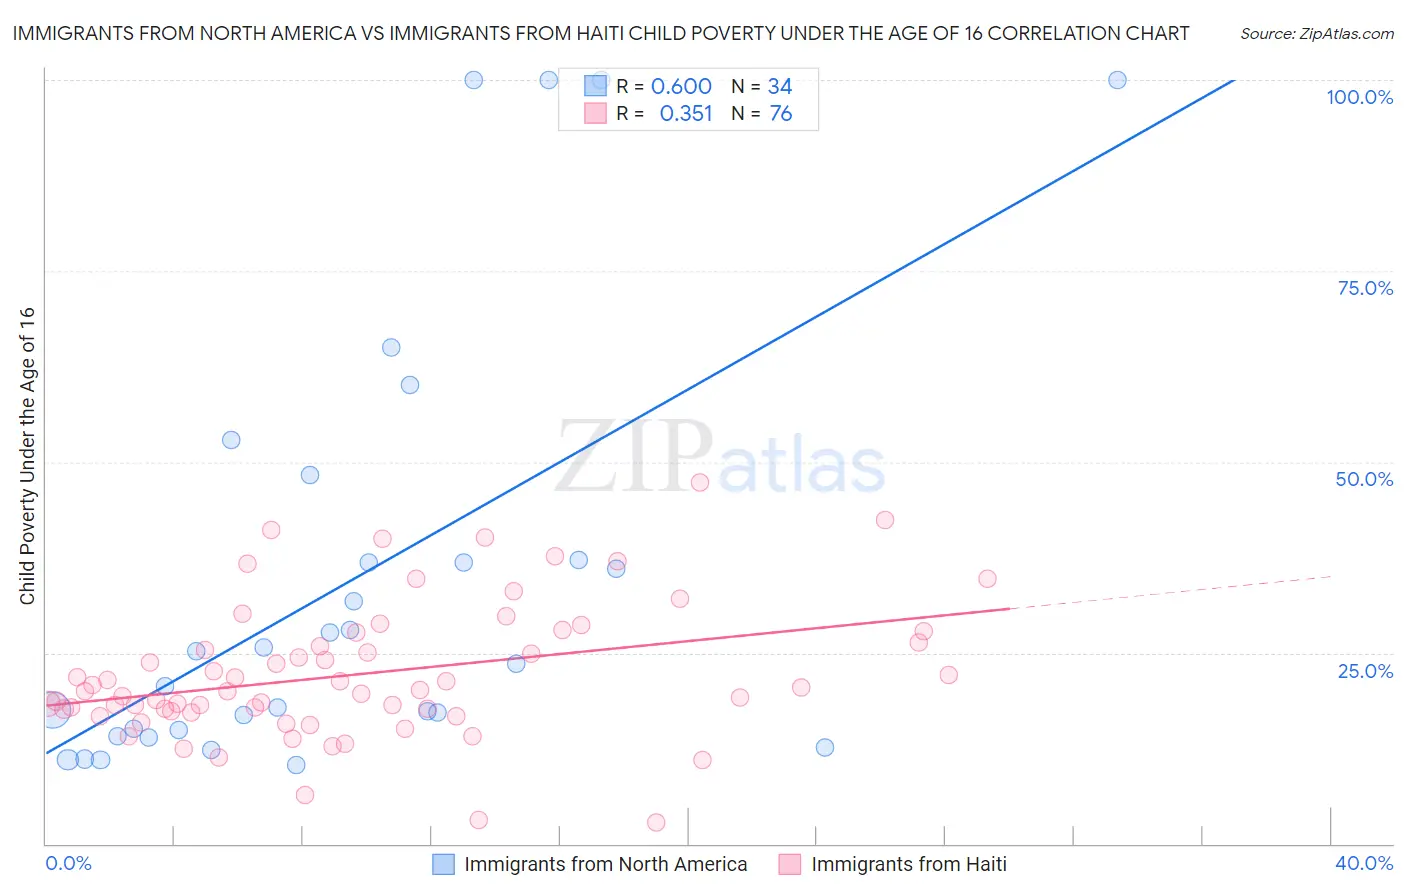 Immigrants from North America vs Immigrants from Haiti Child Poverty Under the Age of 16